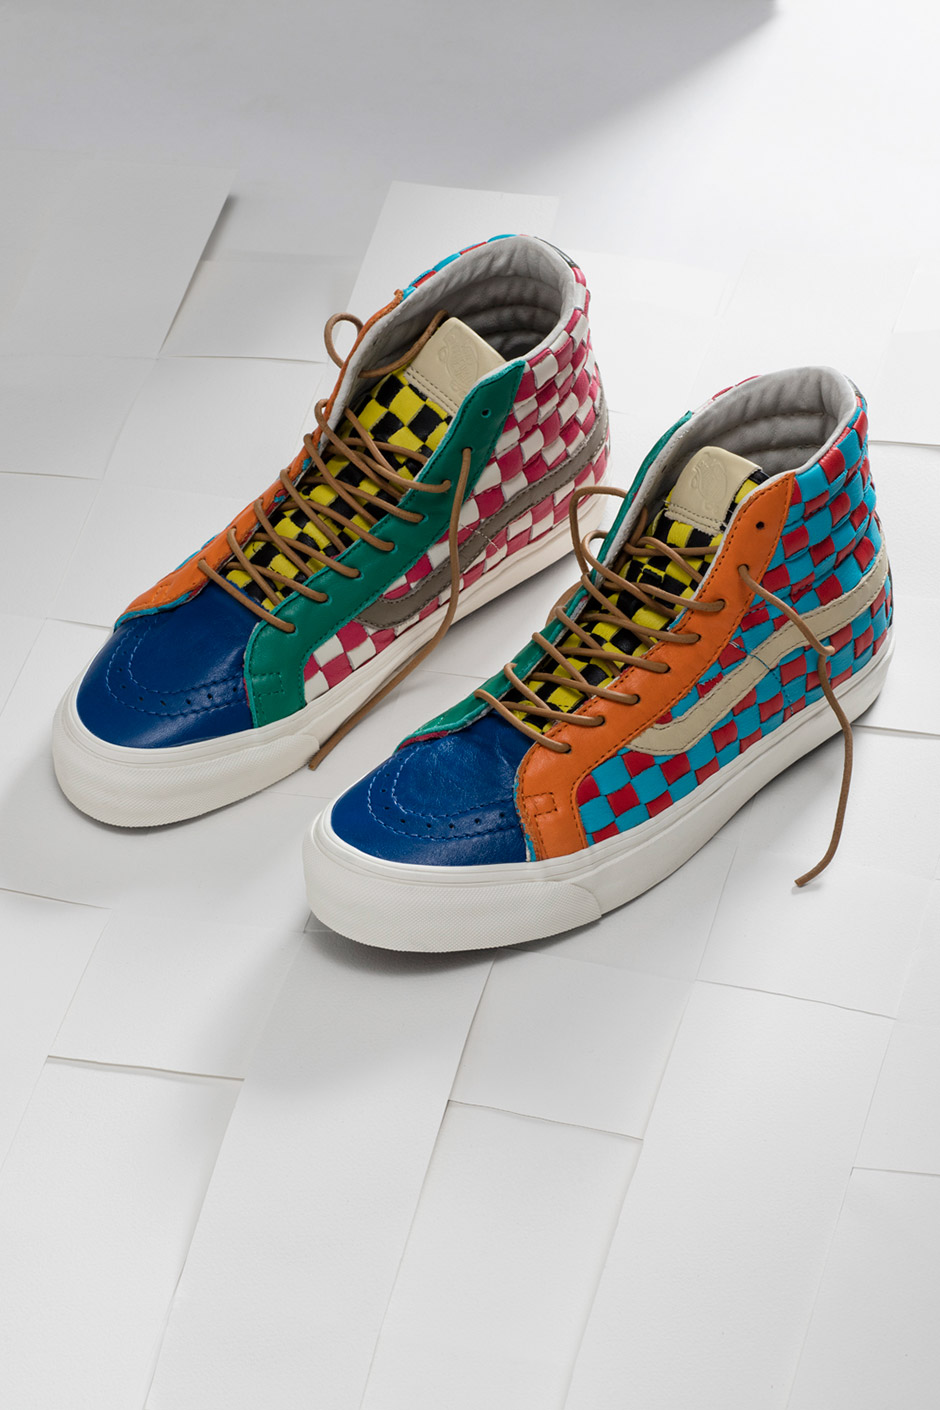 Vault by Vans Woven Leather Checkered Past Collection - nitrolicious.com